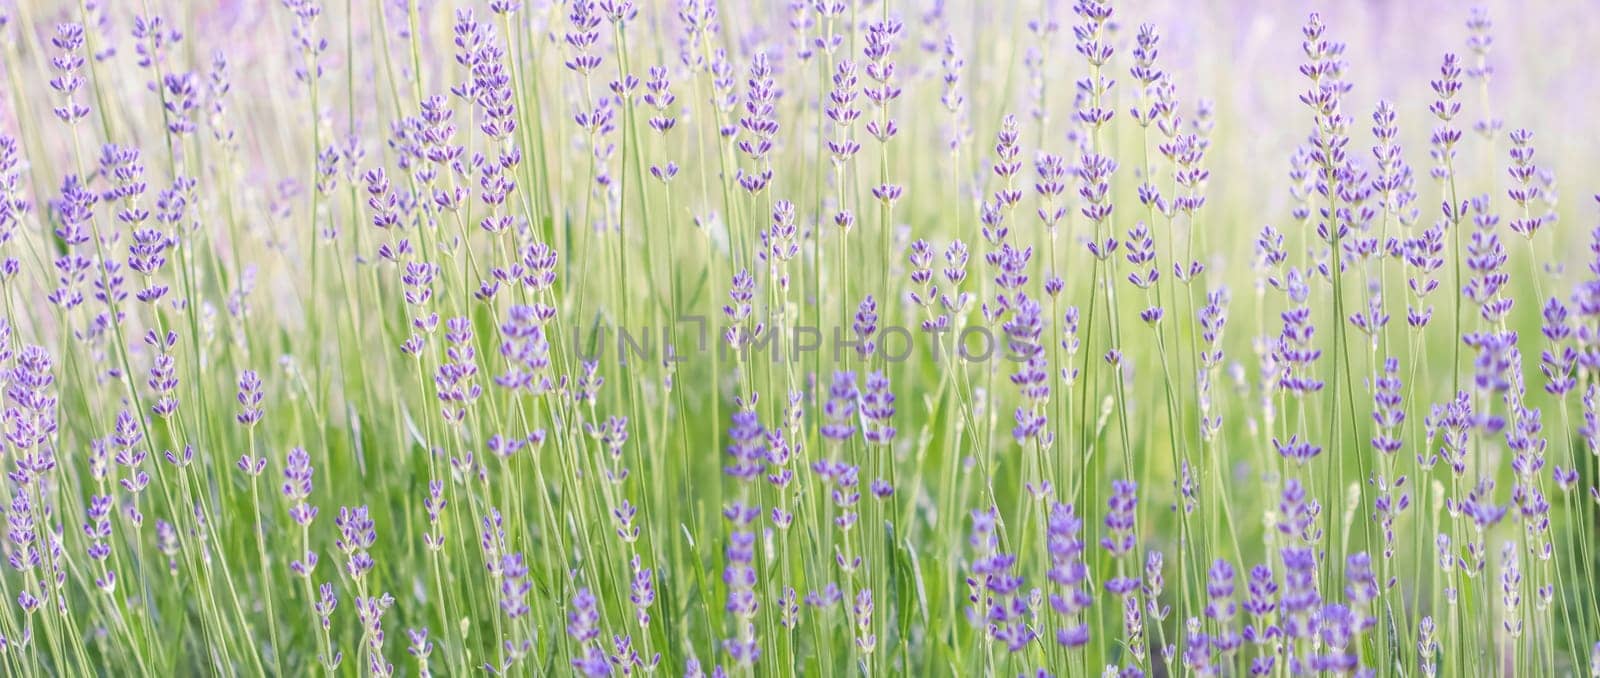 Lavender flowers blooming in the lavender field. Soft focus. Floral backgrond